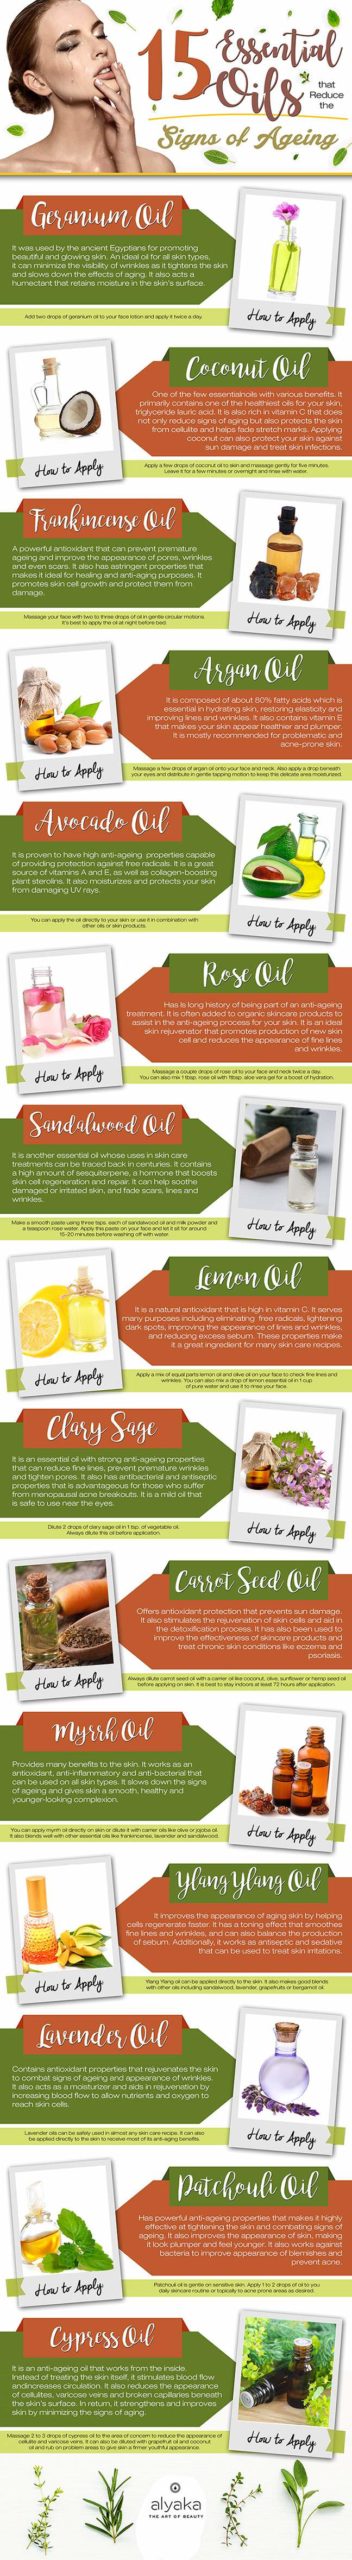 15-Essential-Oils-that-Reduce-the-Signs-of-Ageing